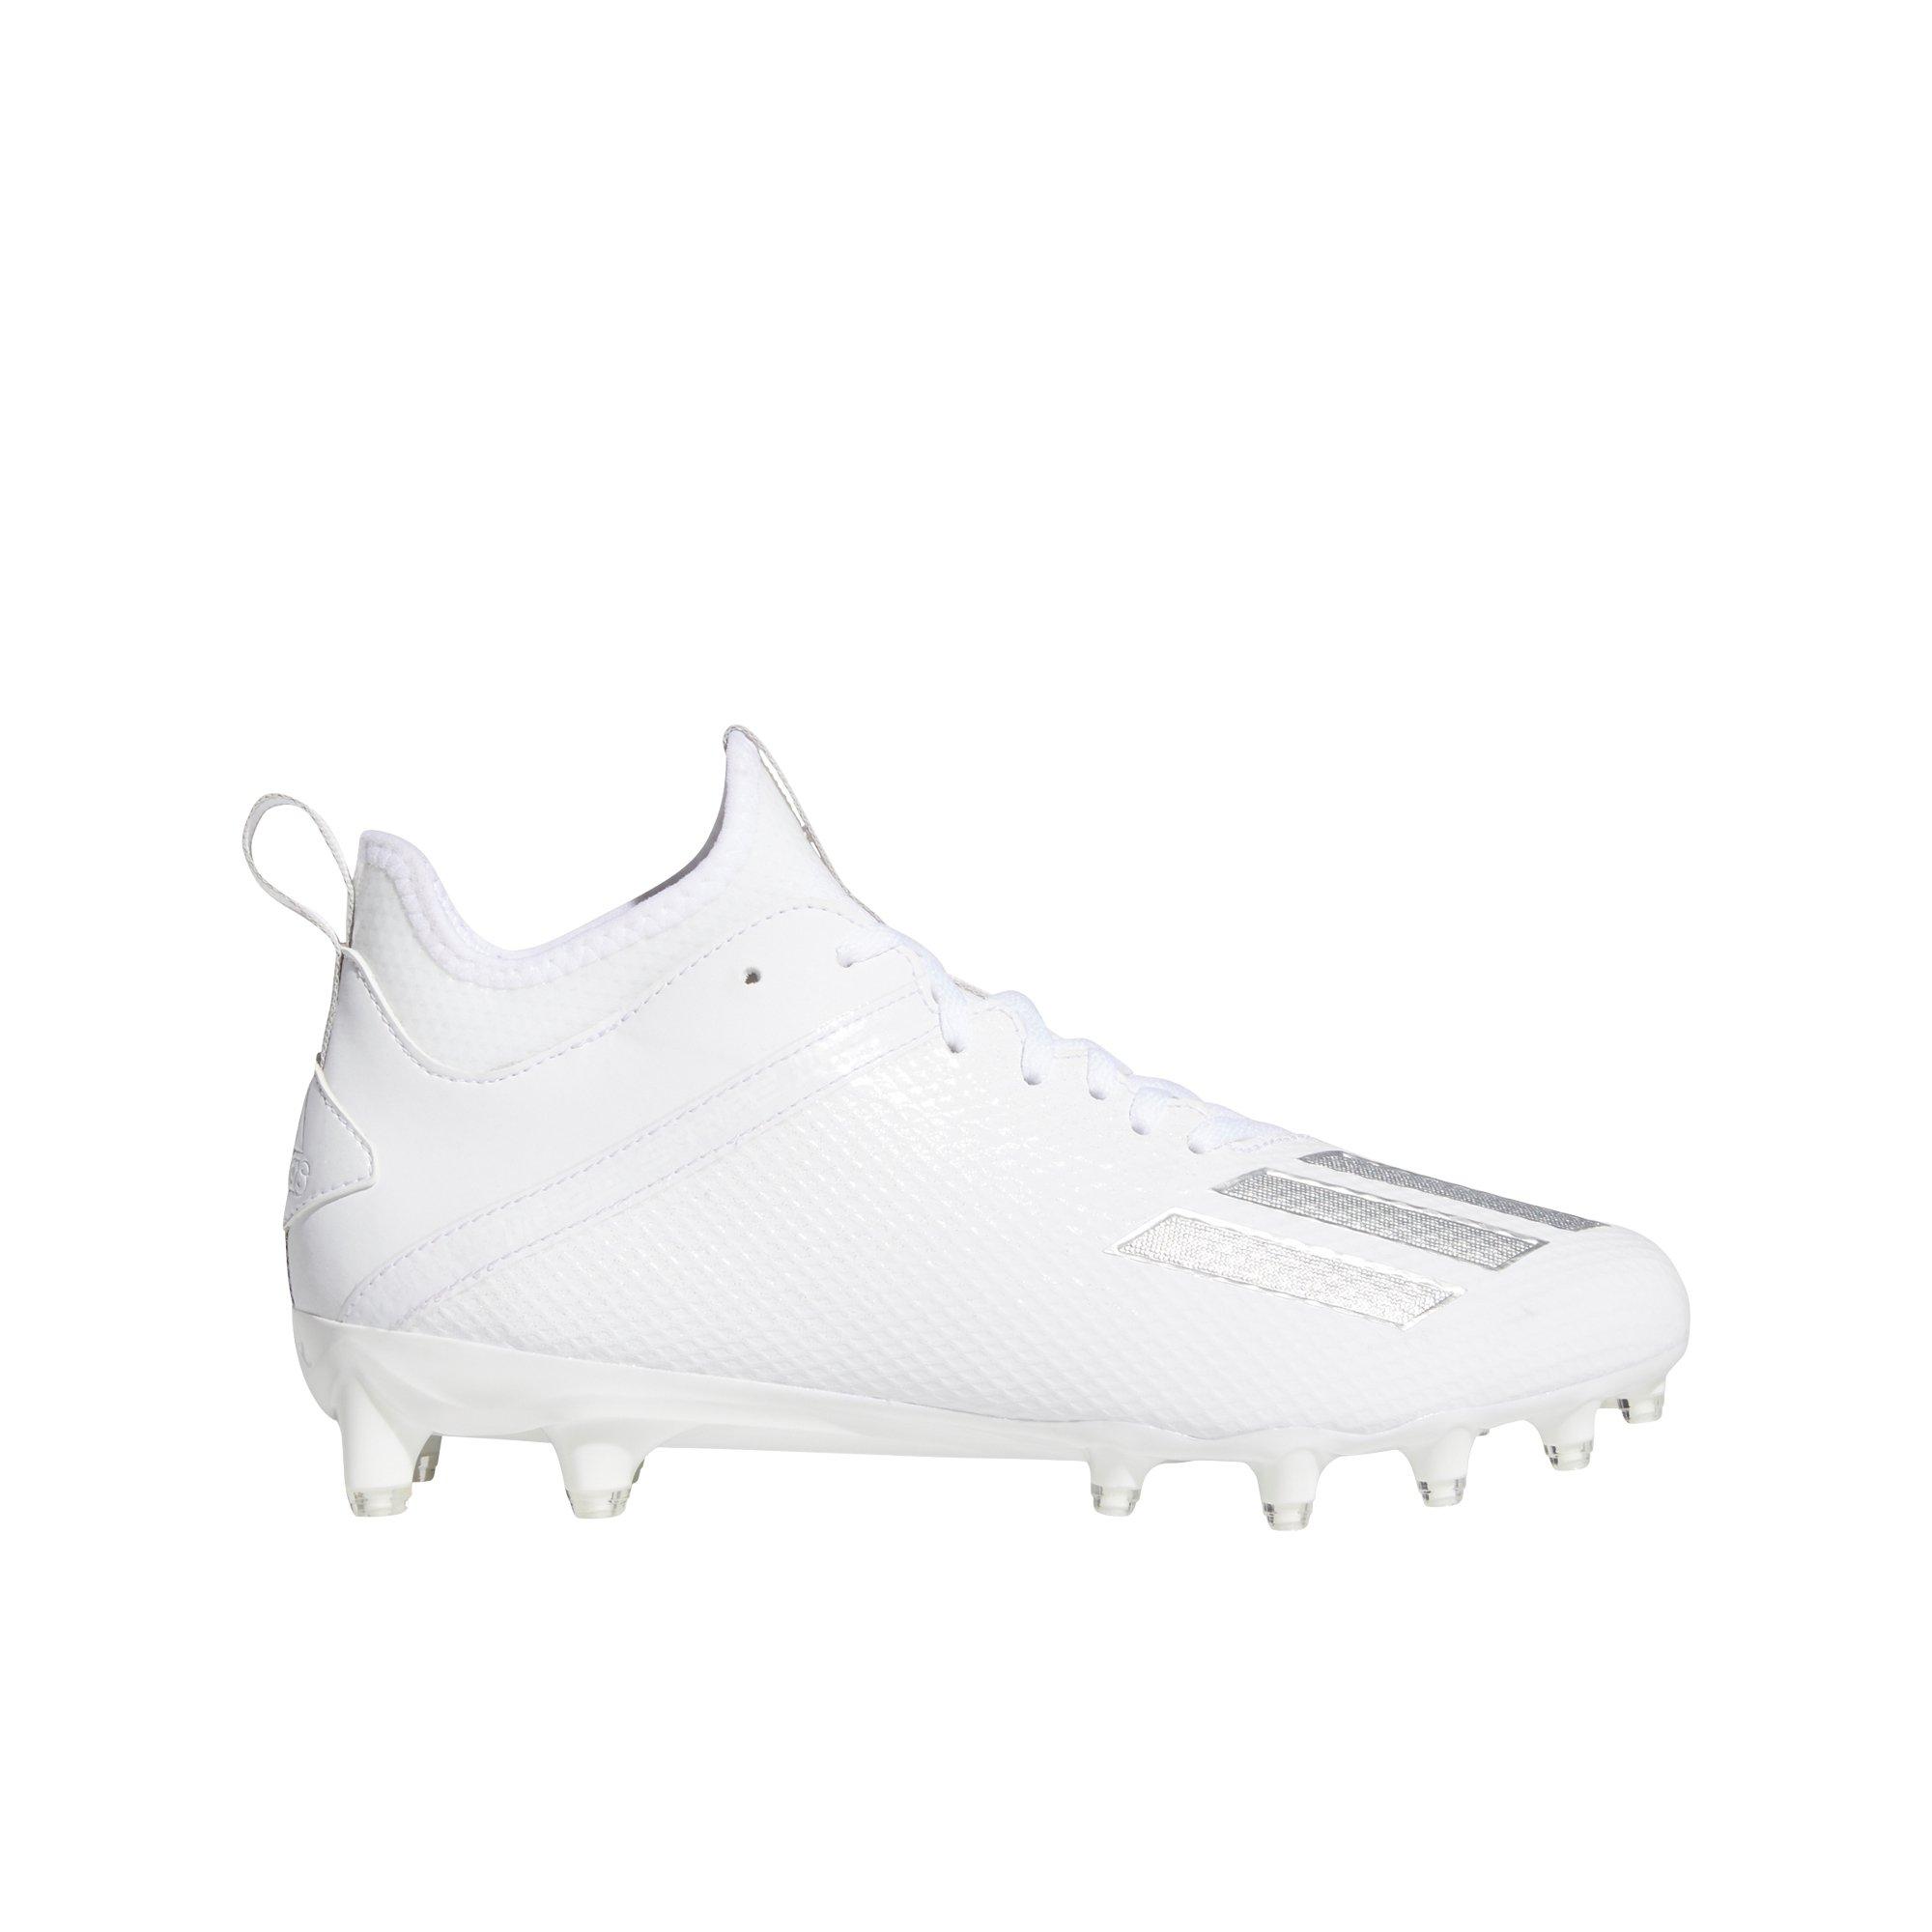 white and black adidas cleats